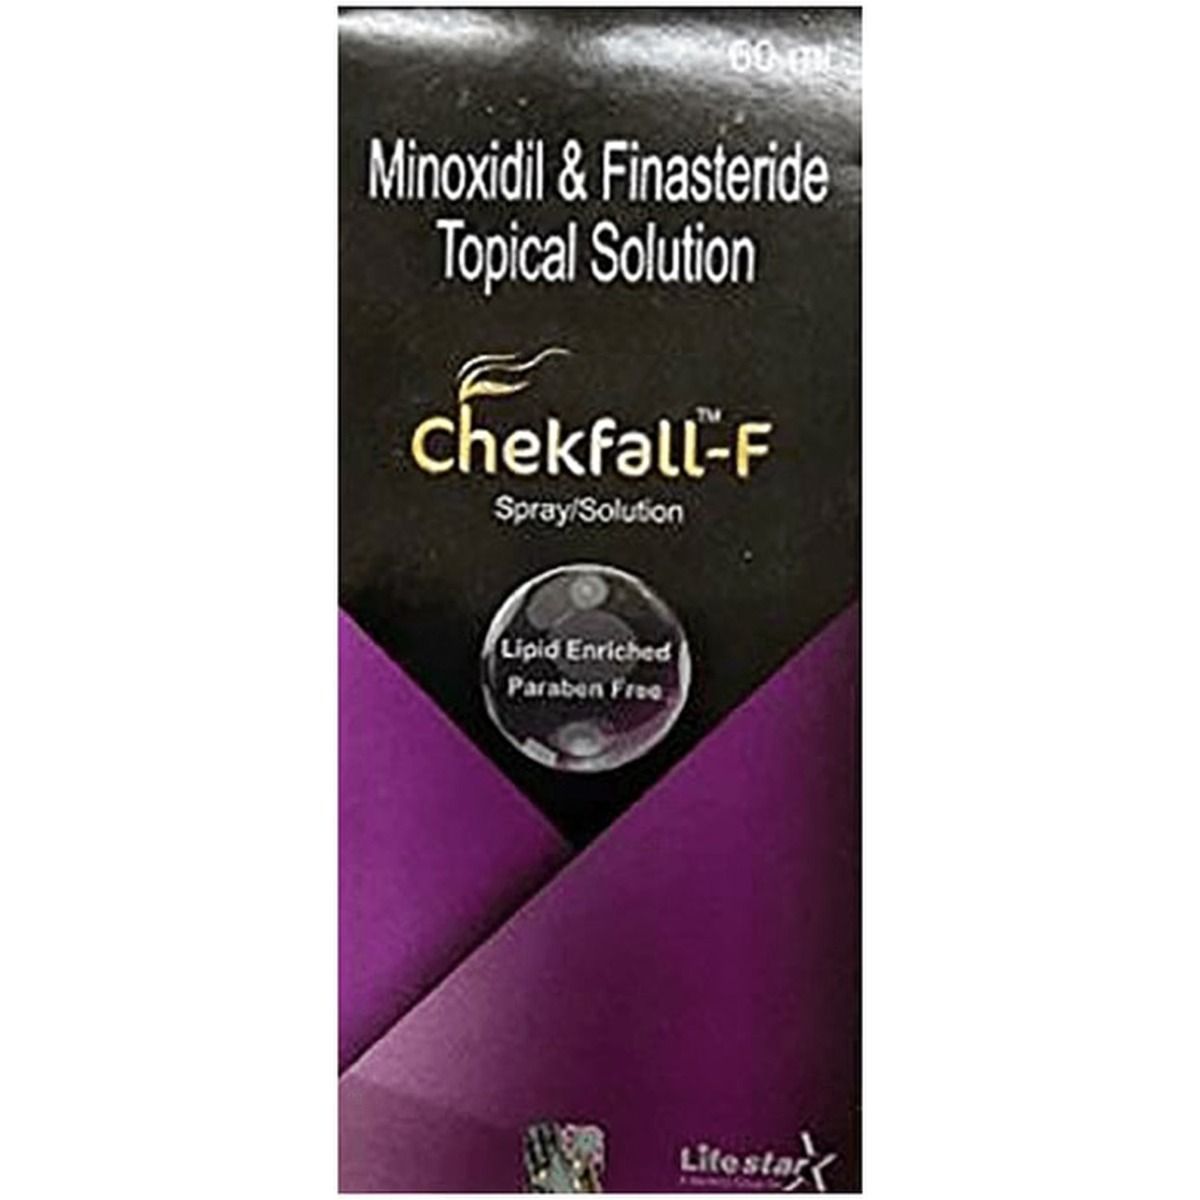 Chekfall-F Topical Solution 60 ml Price, Uses, Side Effects, Composition -  Apollo Pharmacy